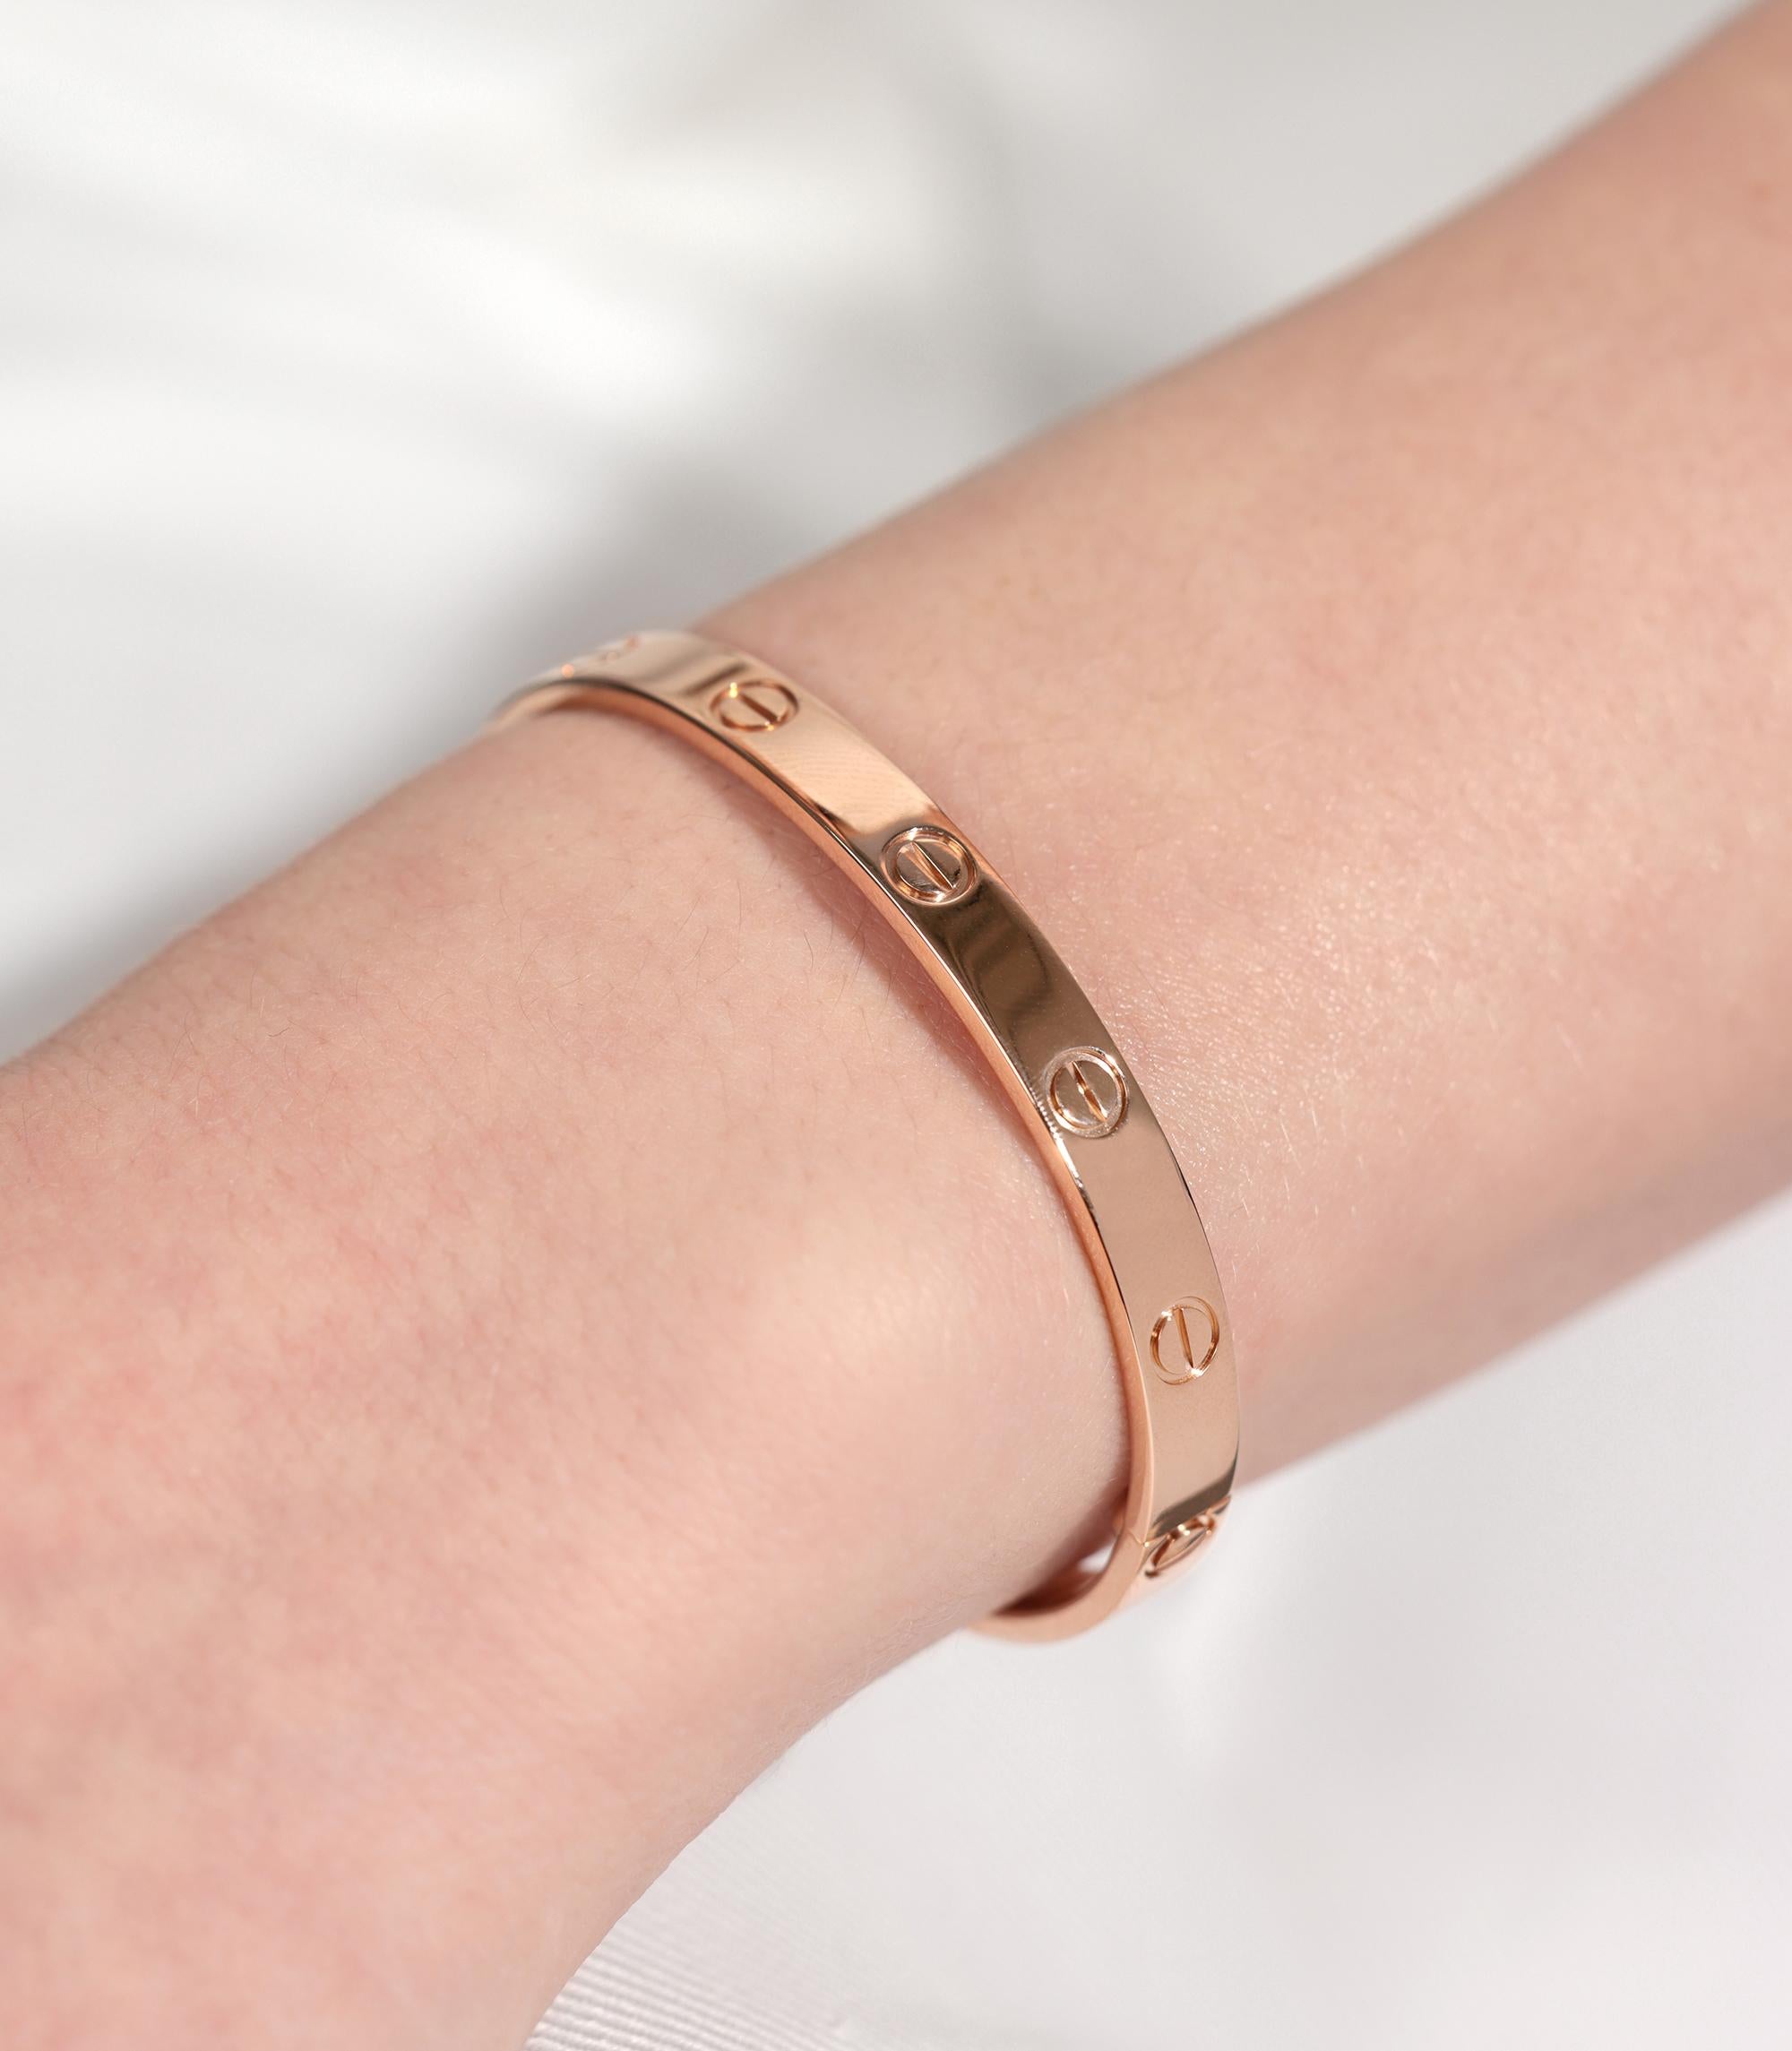 Cartier 18ct Rose Gold Love Bangle

Brand - Cartier
Model- Love Bangle
Product Type- Bracelet
Serial Number- WP****
Accompanied By- Cartier Pouch, Service Papers, Screwdriver
Material(s)- 18ct Rose Gold

Bracelet Length- 17cm
Bracelet Width-